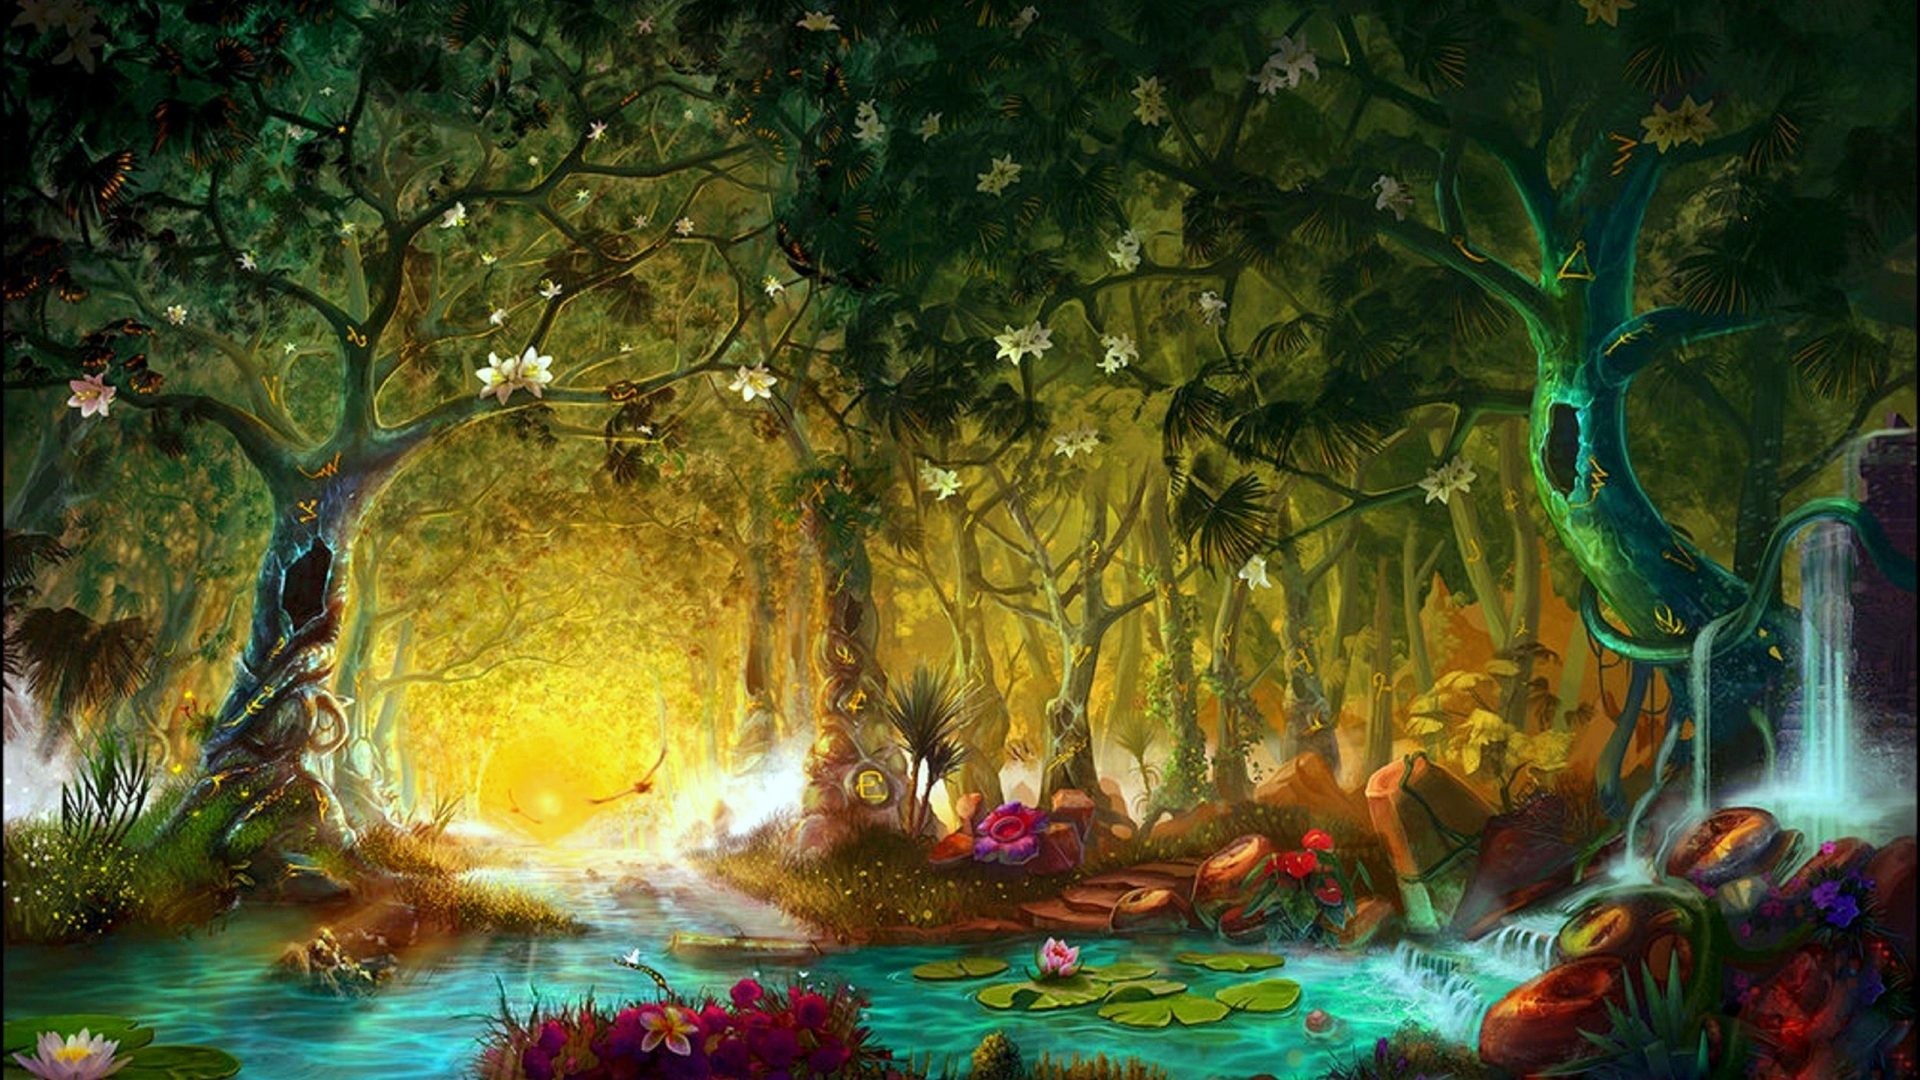 1920x1080 Wildlife Tag - Forests Nature Lotus Pond Birds Butterflies Enchanted  Animals Spring Cool Designs Paintings Attractions